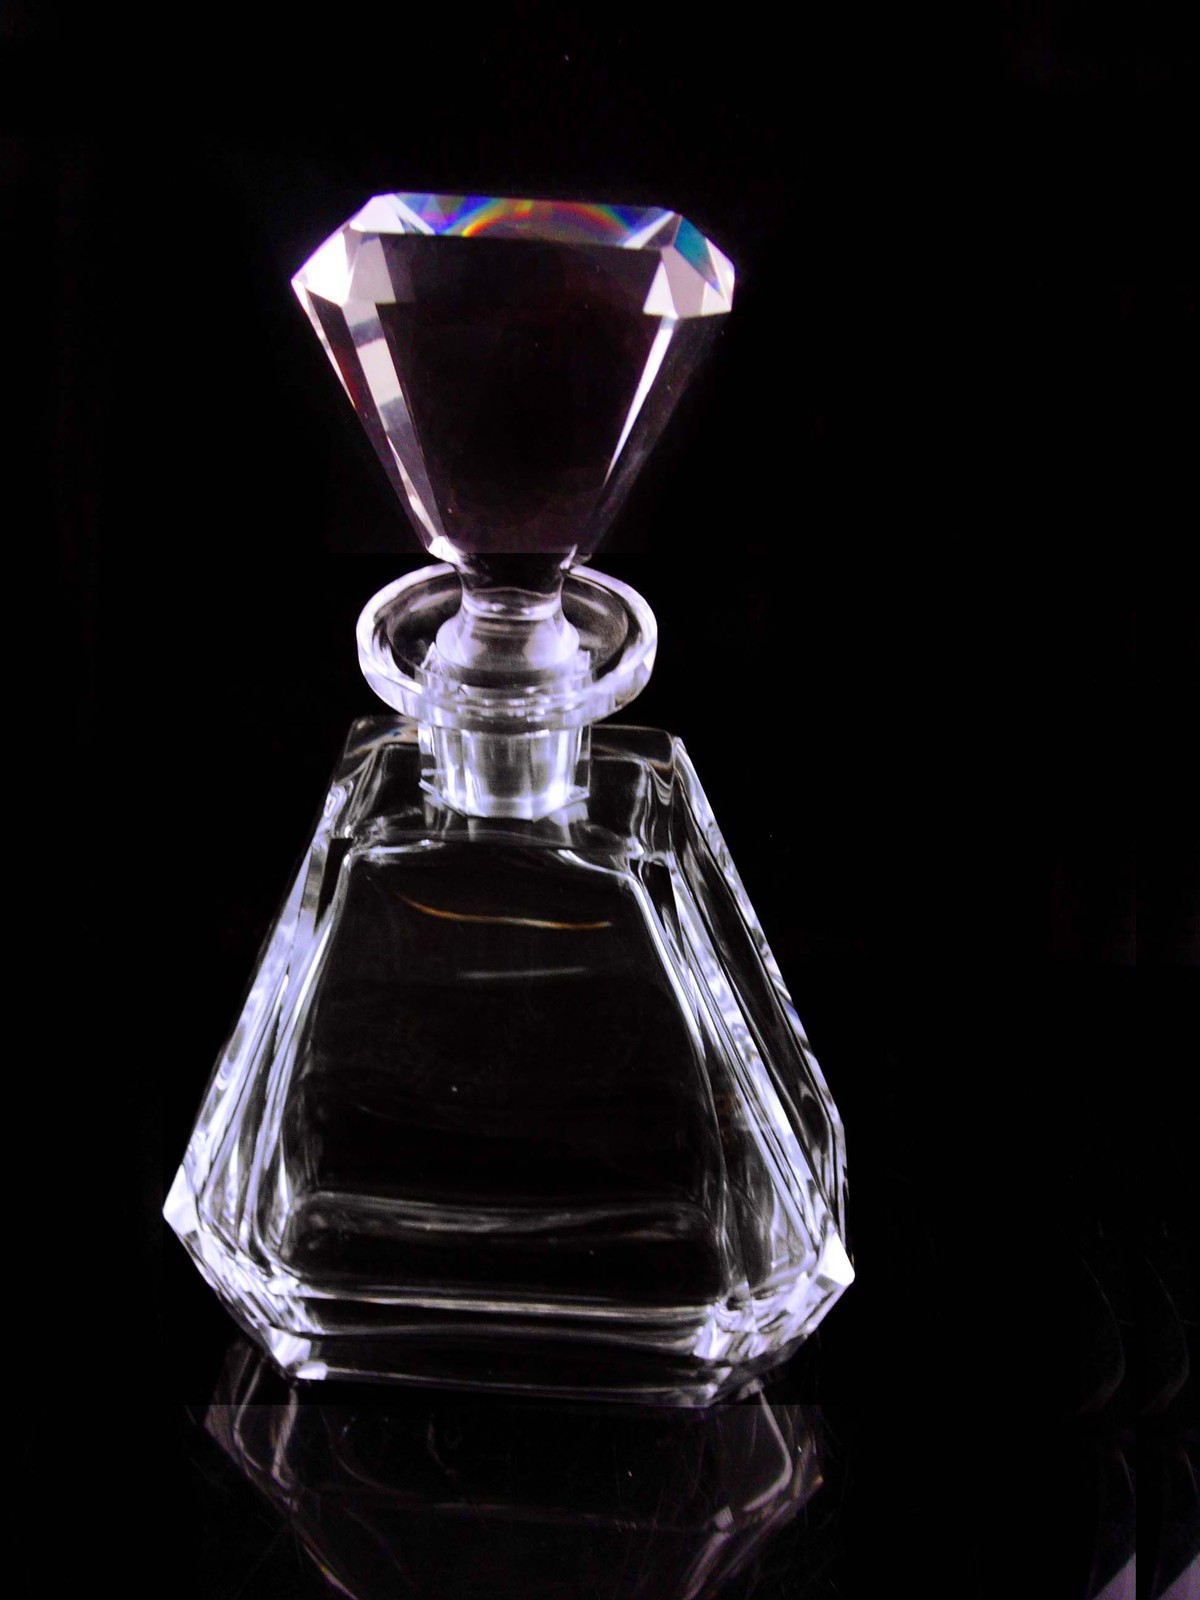 Primary image for Vintage large heavy lead crystal bottle - Whiskey Decanter - wedding gift - Anni